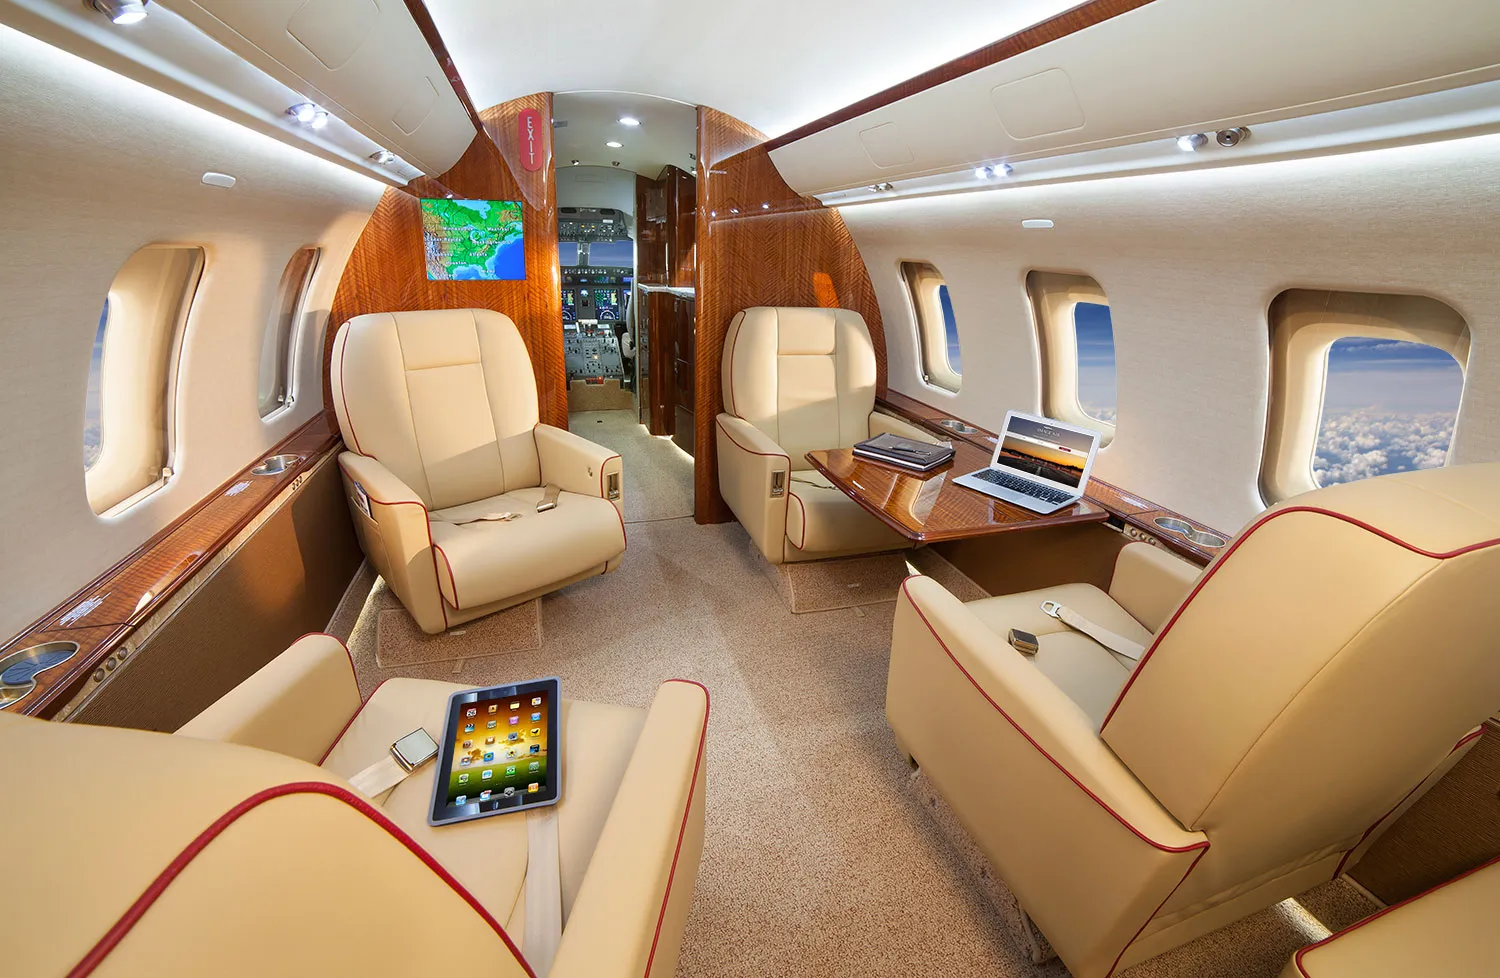 inside view of luxury jet with an ipad and macbook on the tables